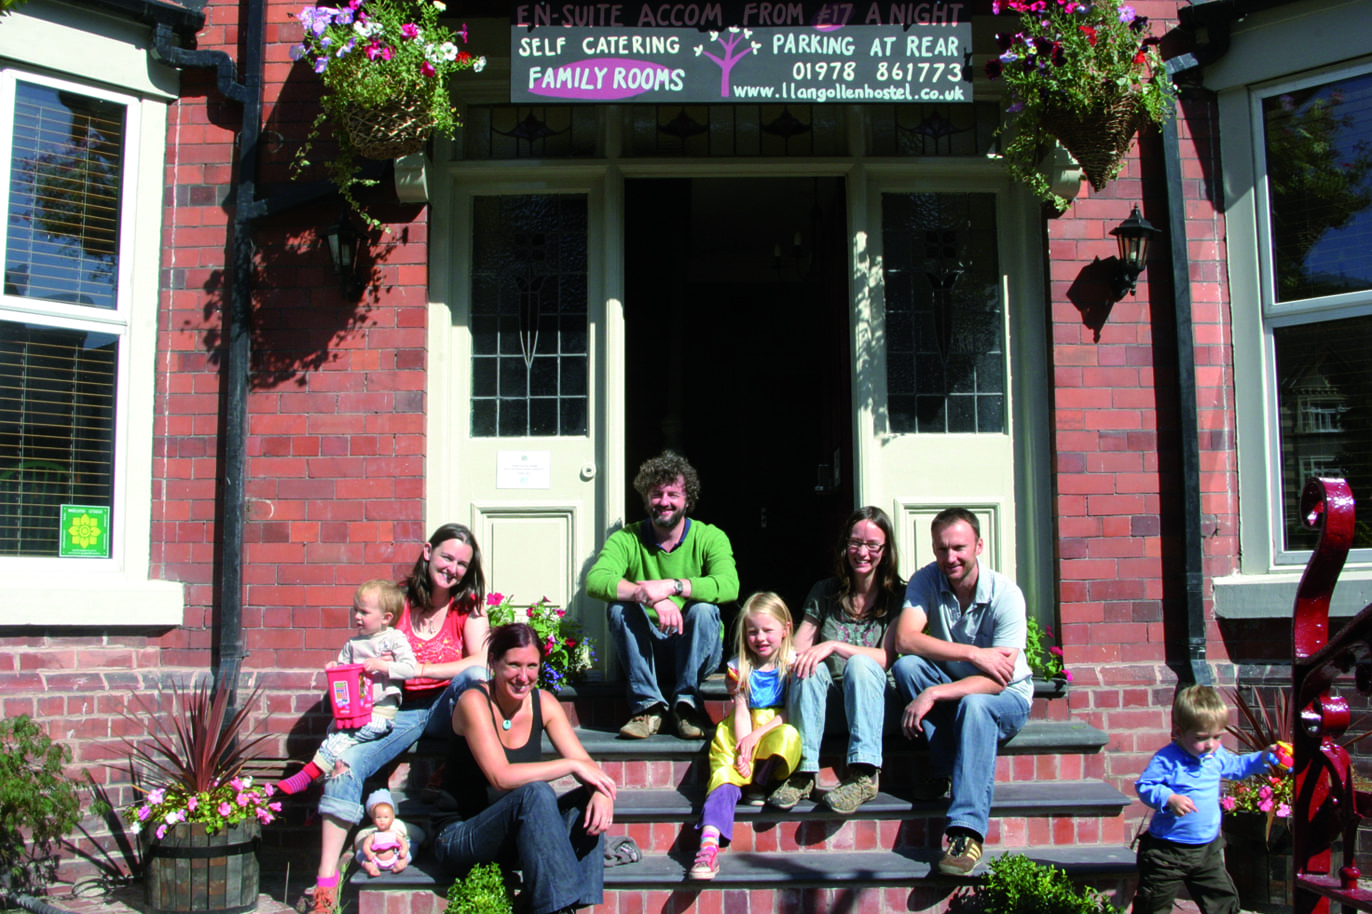 Family group at Llangollen Hostel where wales welcomes the world